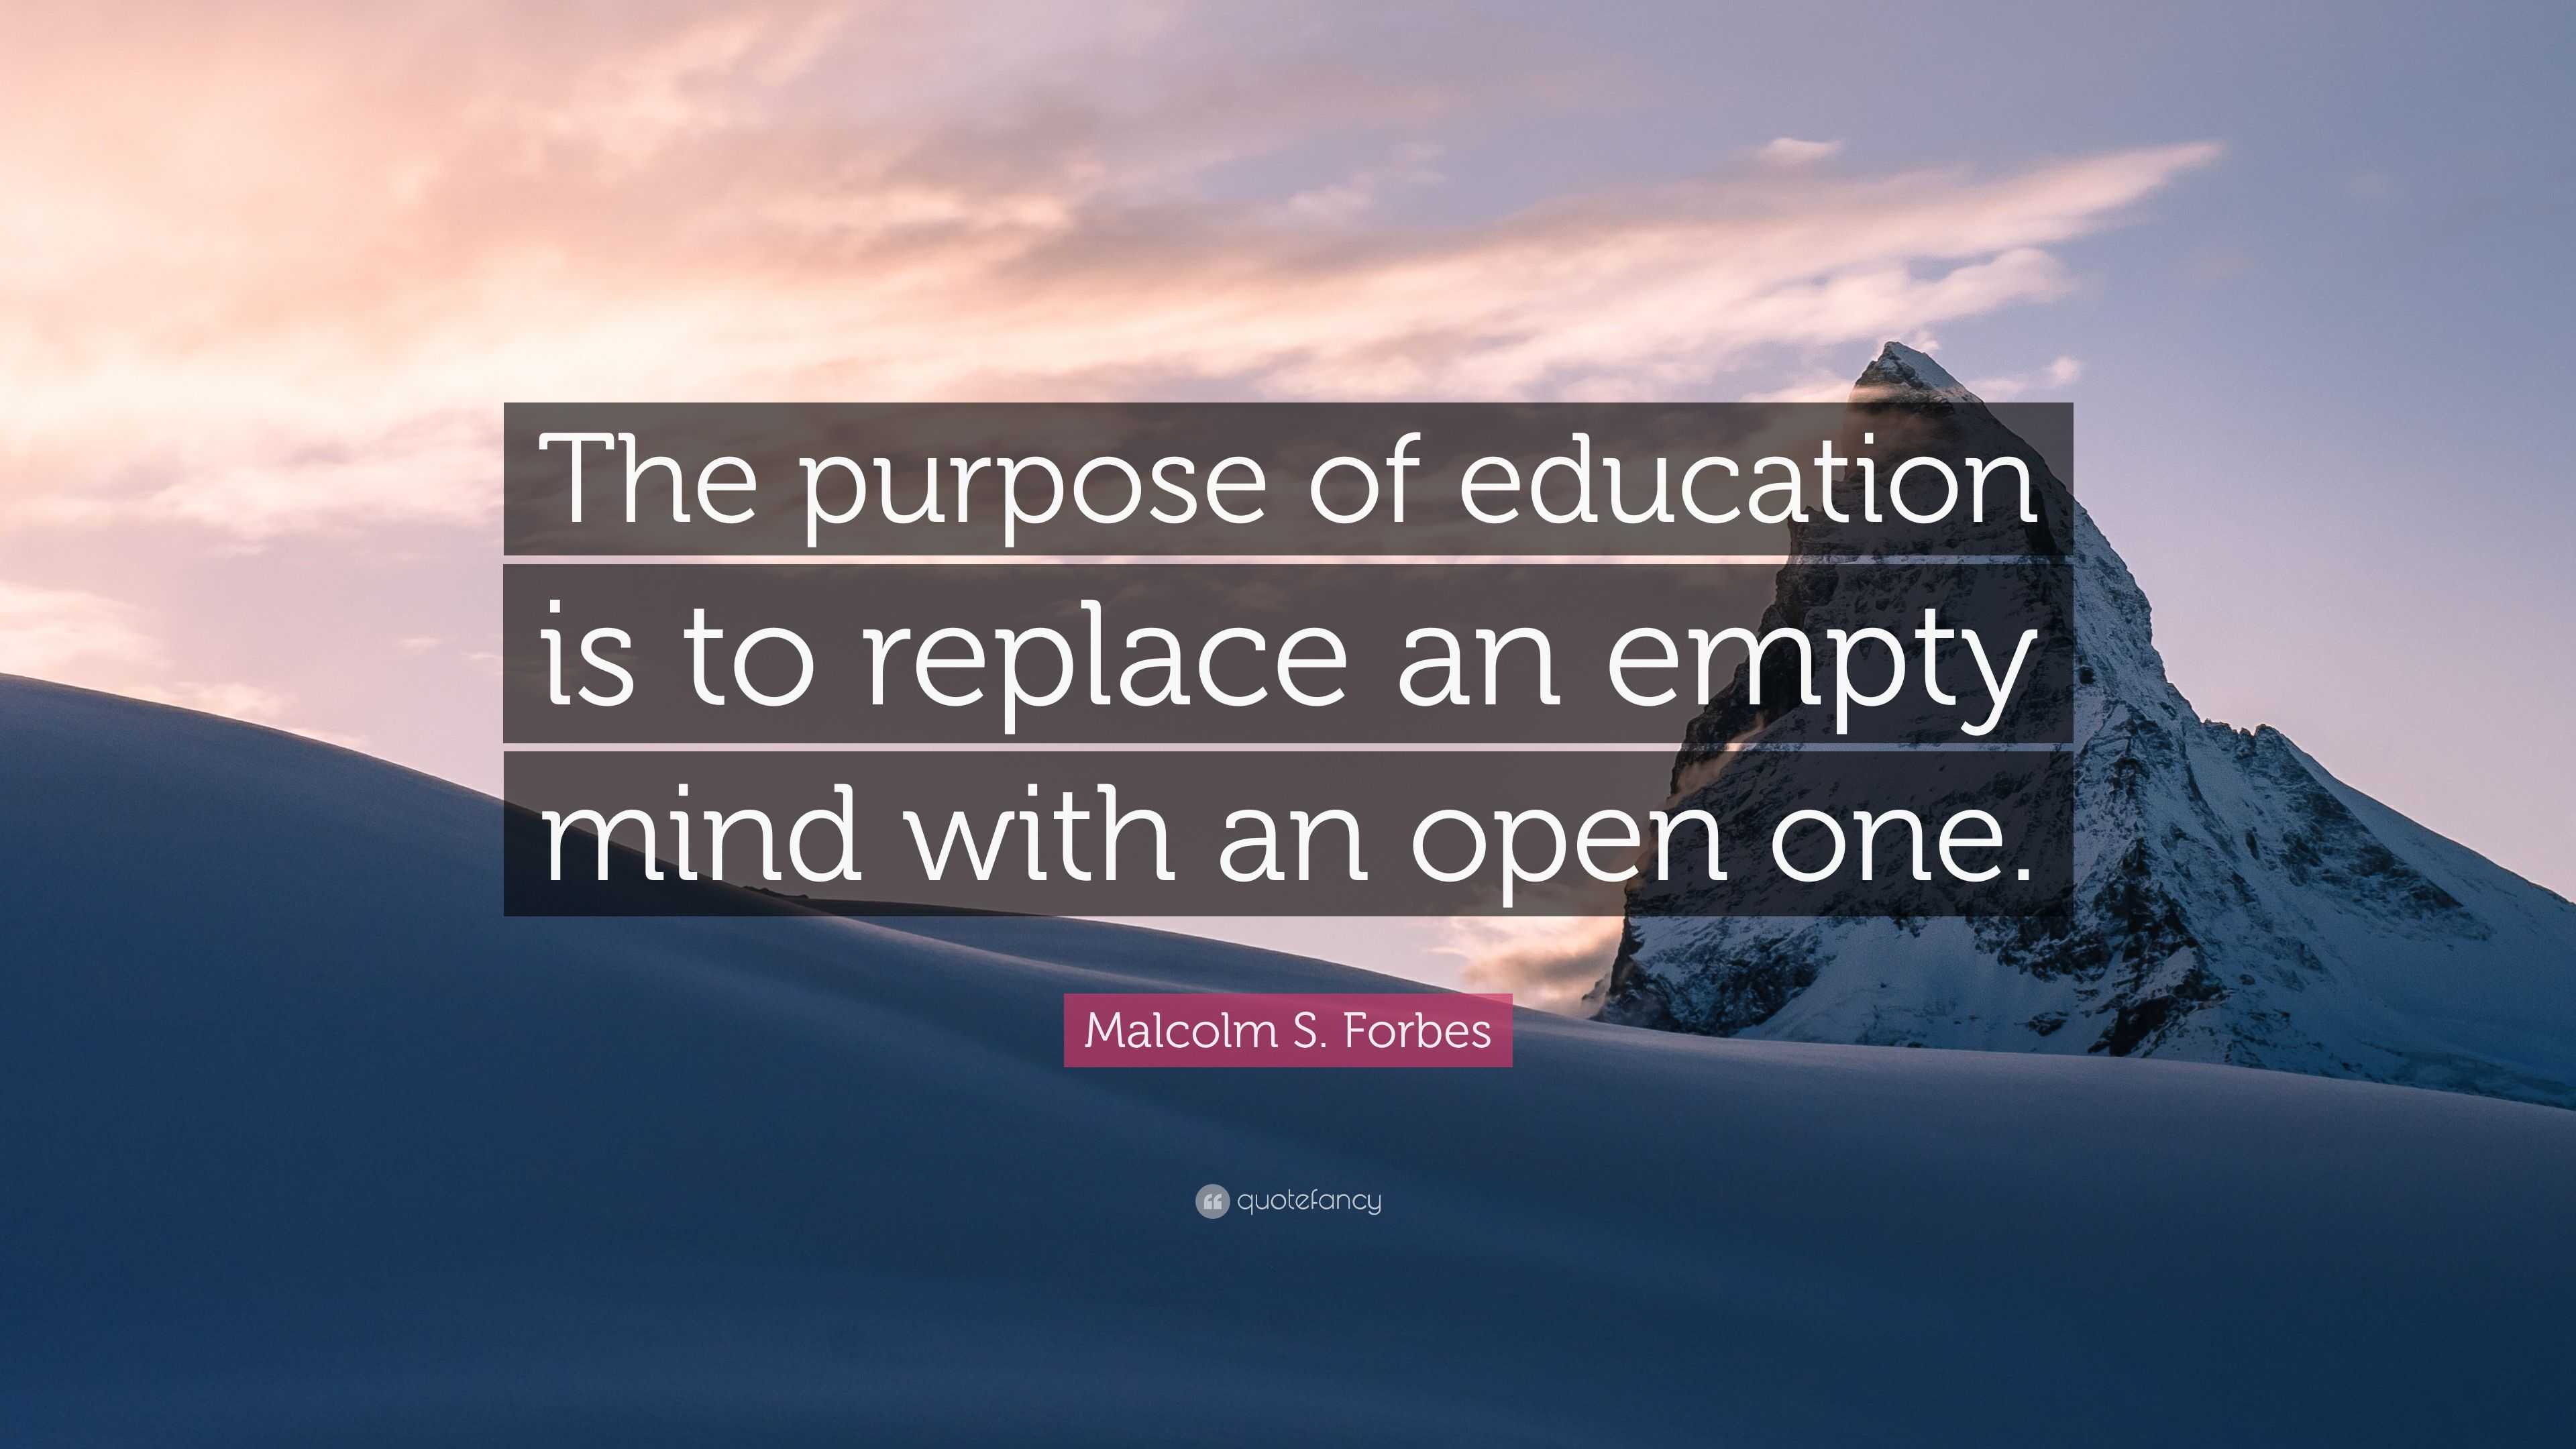 Malcolm S. Forbes Quote: “The purpose of education is to replace an